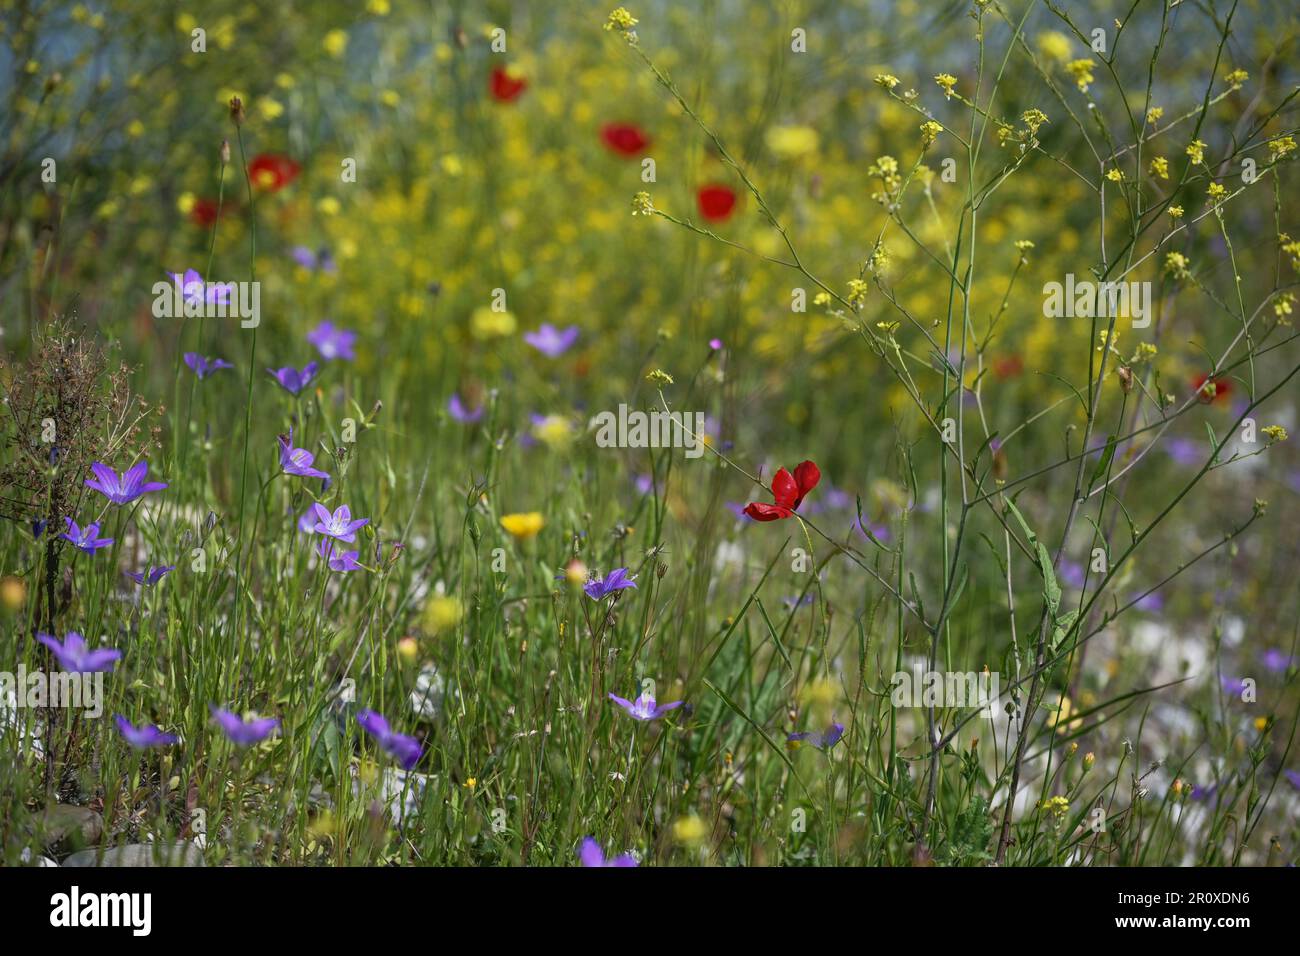 Flower meadow with blue spreading bellflower (Campanula patula), red poppy (Papaver rhoeas) and yellow feral rapeseed (Brassica napus), selected focus Stock Photo